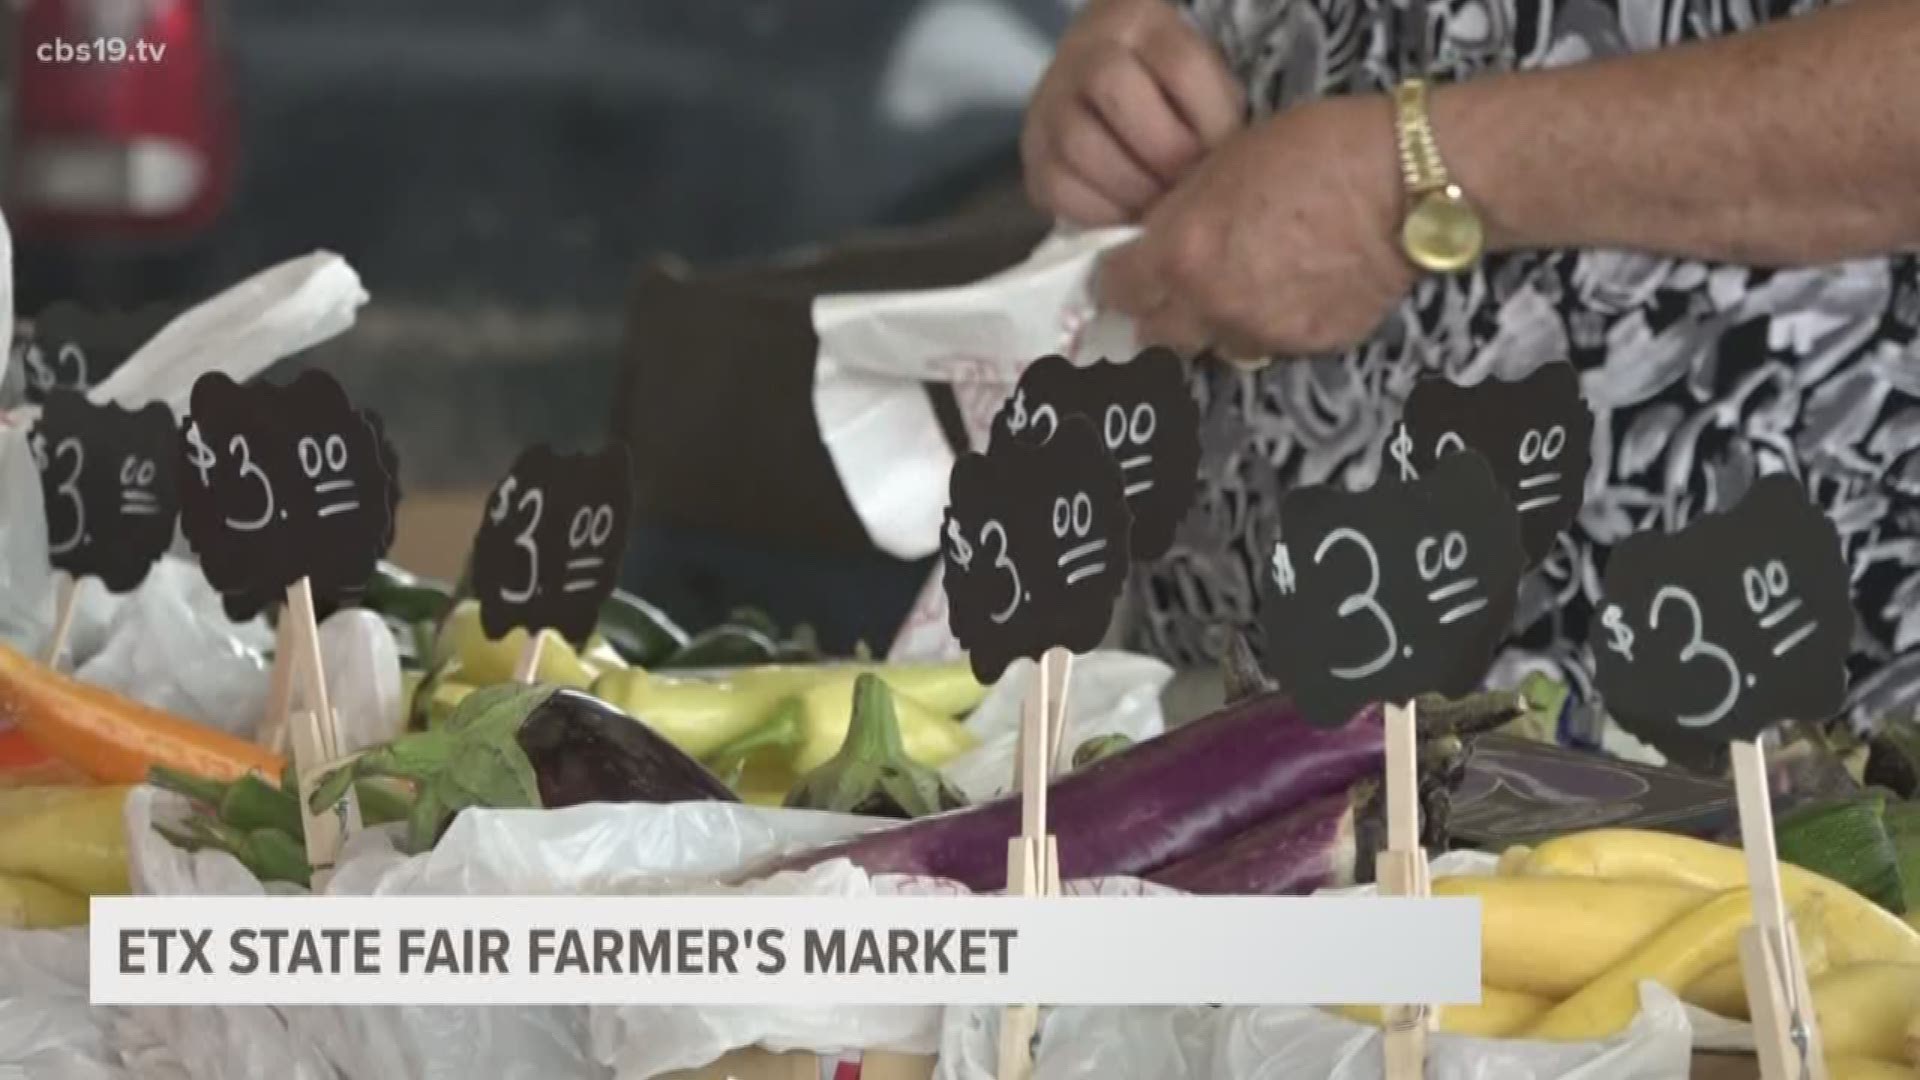 The East Texas State Fair farmer's market is open every Saturday from 7 a.m. to 1 p.m. through the summer.